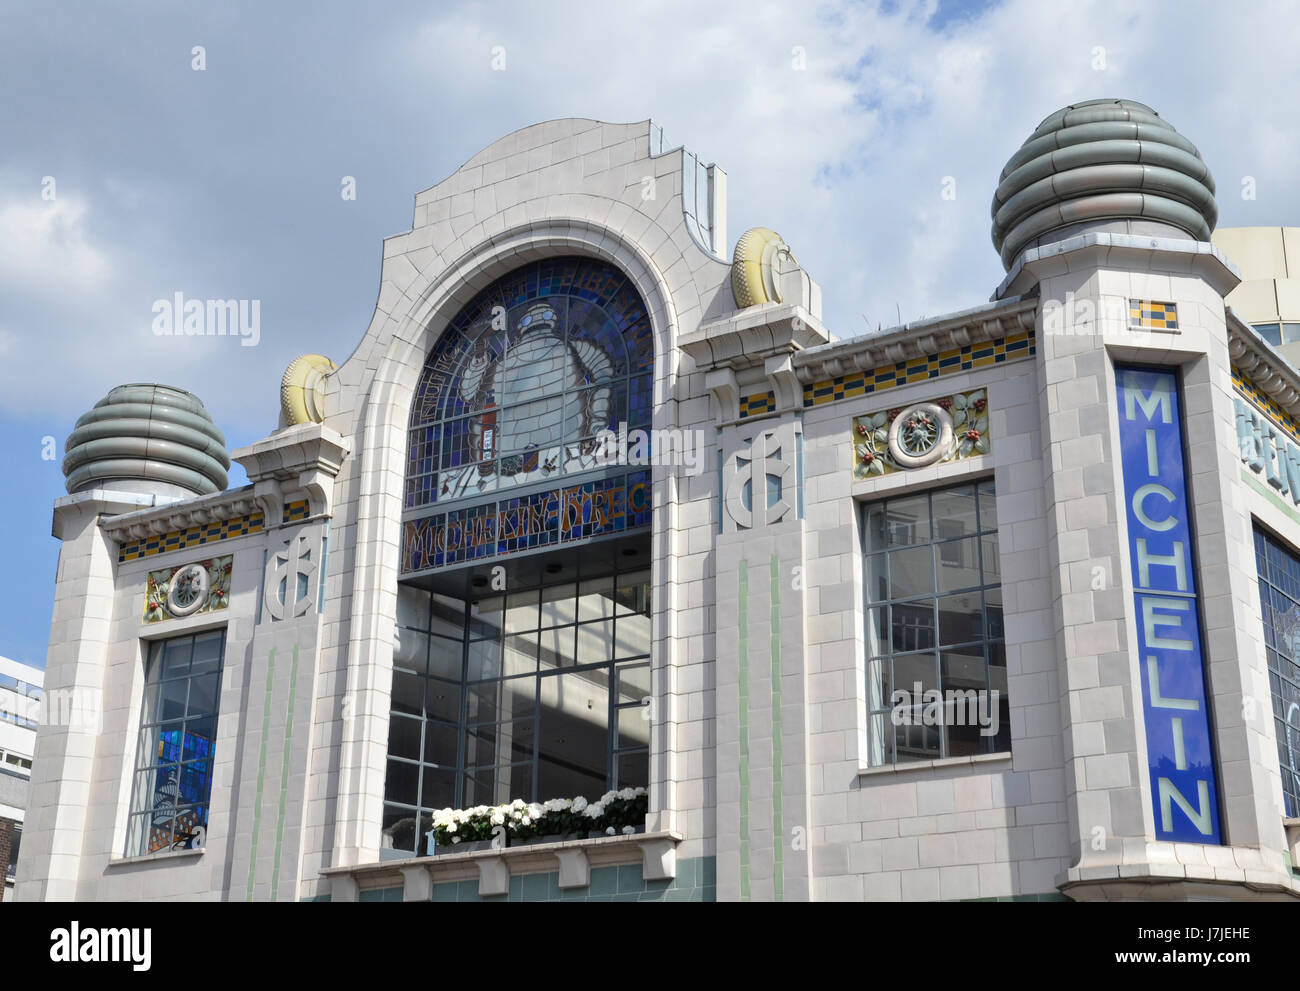 The Art Deco Bibendum Restaurant in Fulham Road, Kensington, London. The building is Michelin House, former hq of the tyre company in the UK Stock Photo